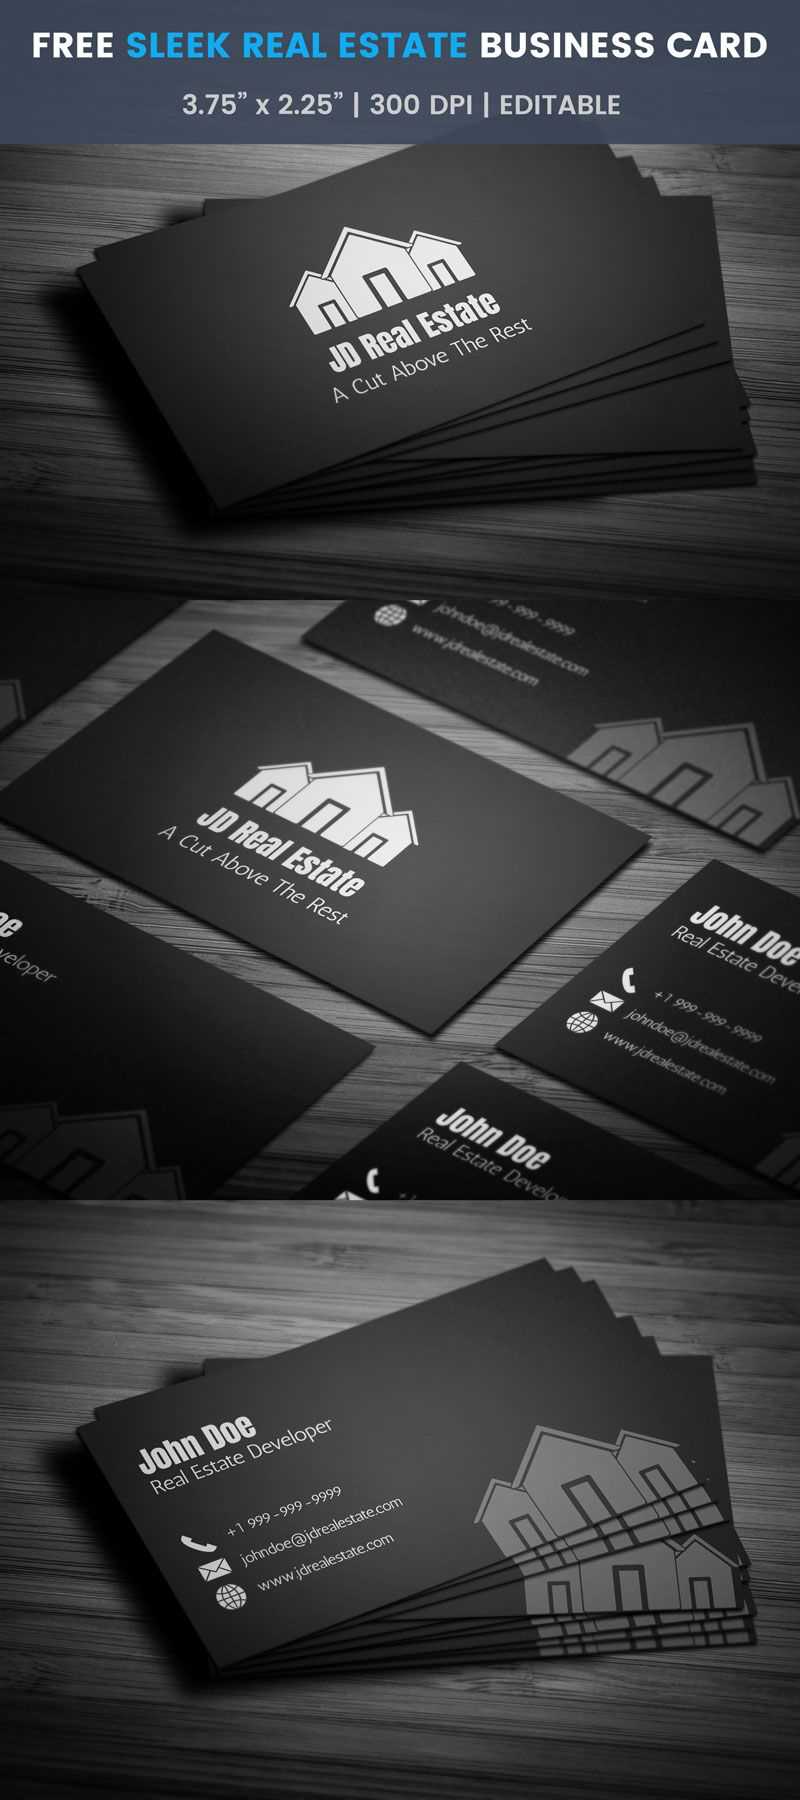 Sleek Real Estate Business Card – Full Preview | Free Regarding Real Estate Business Cards Templates Free